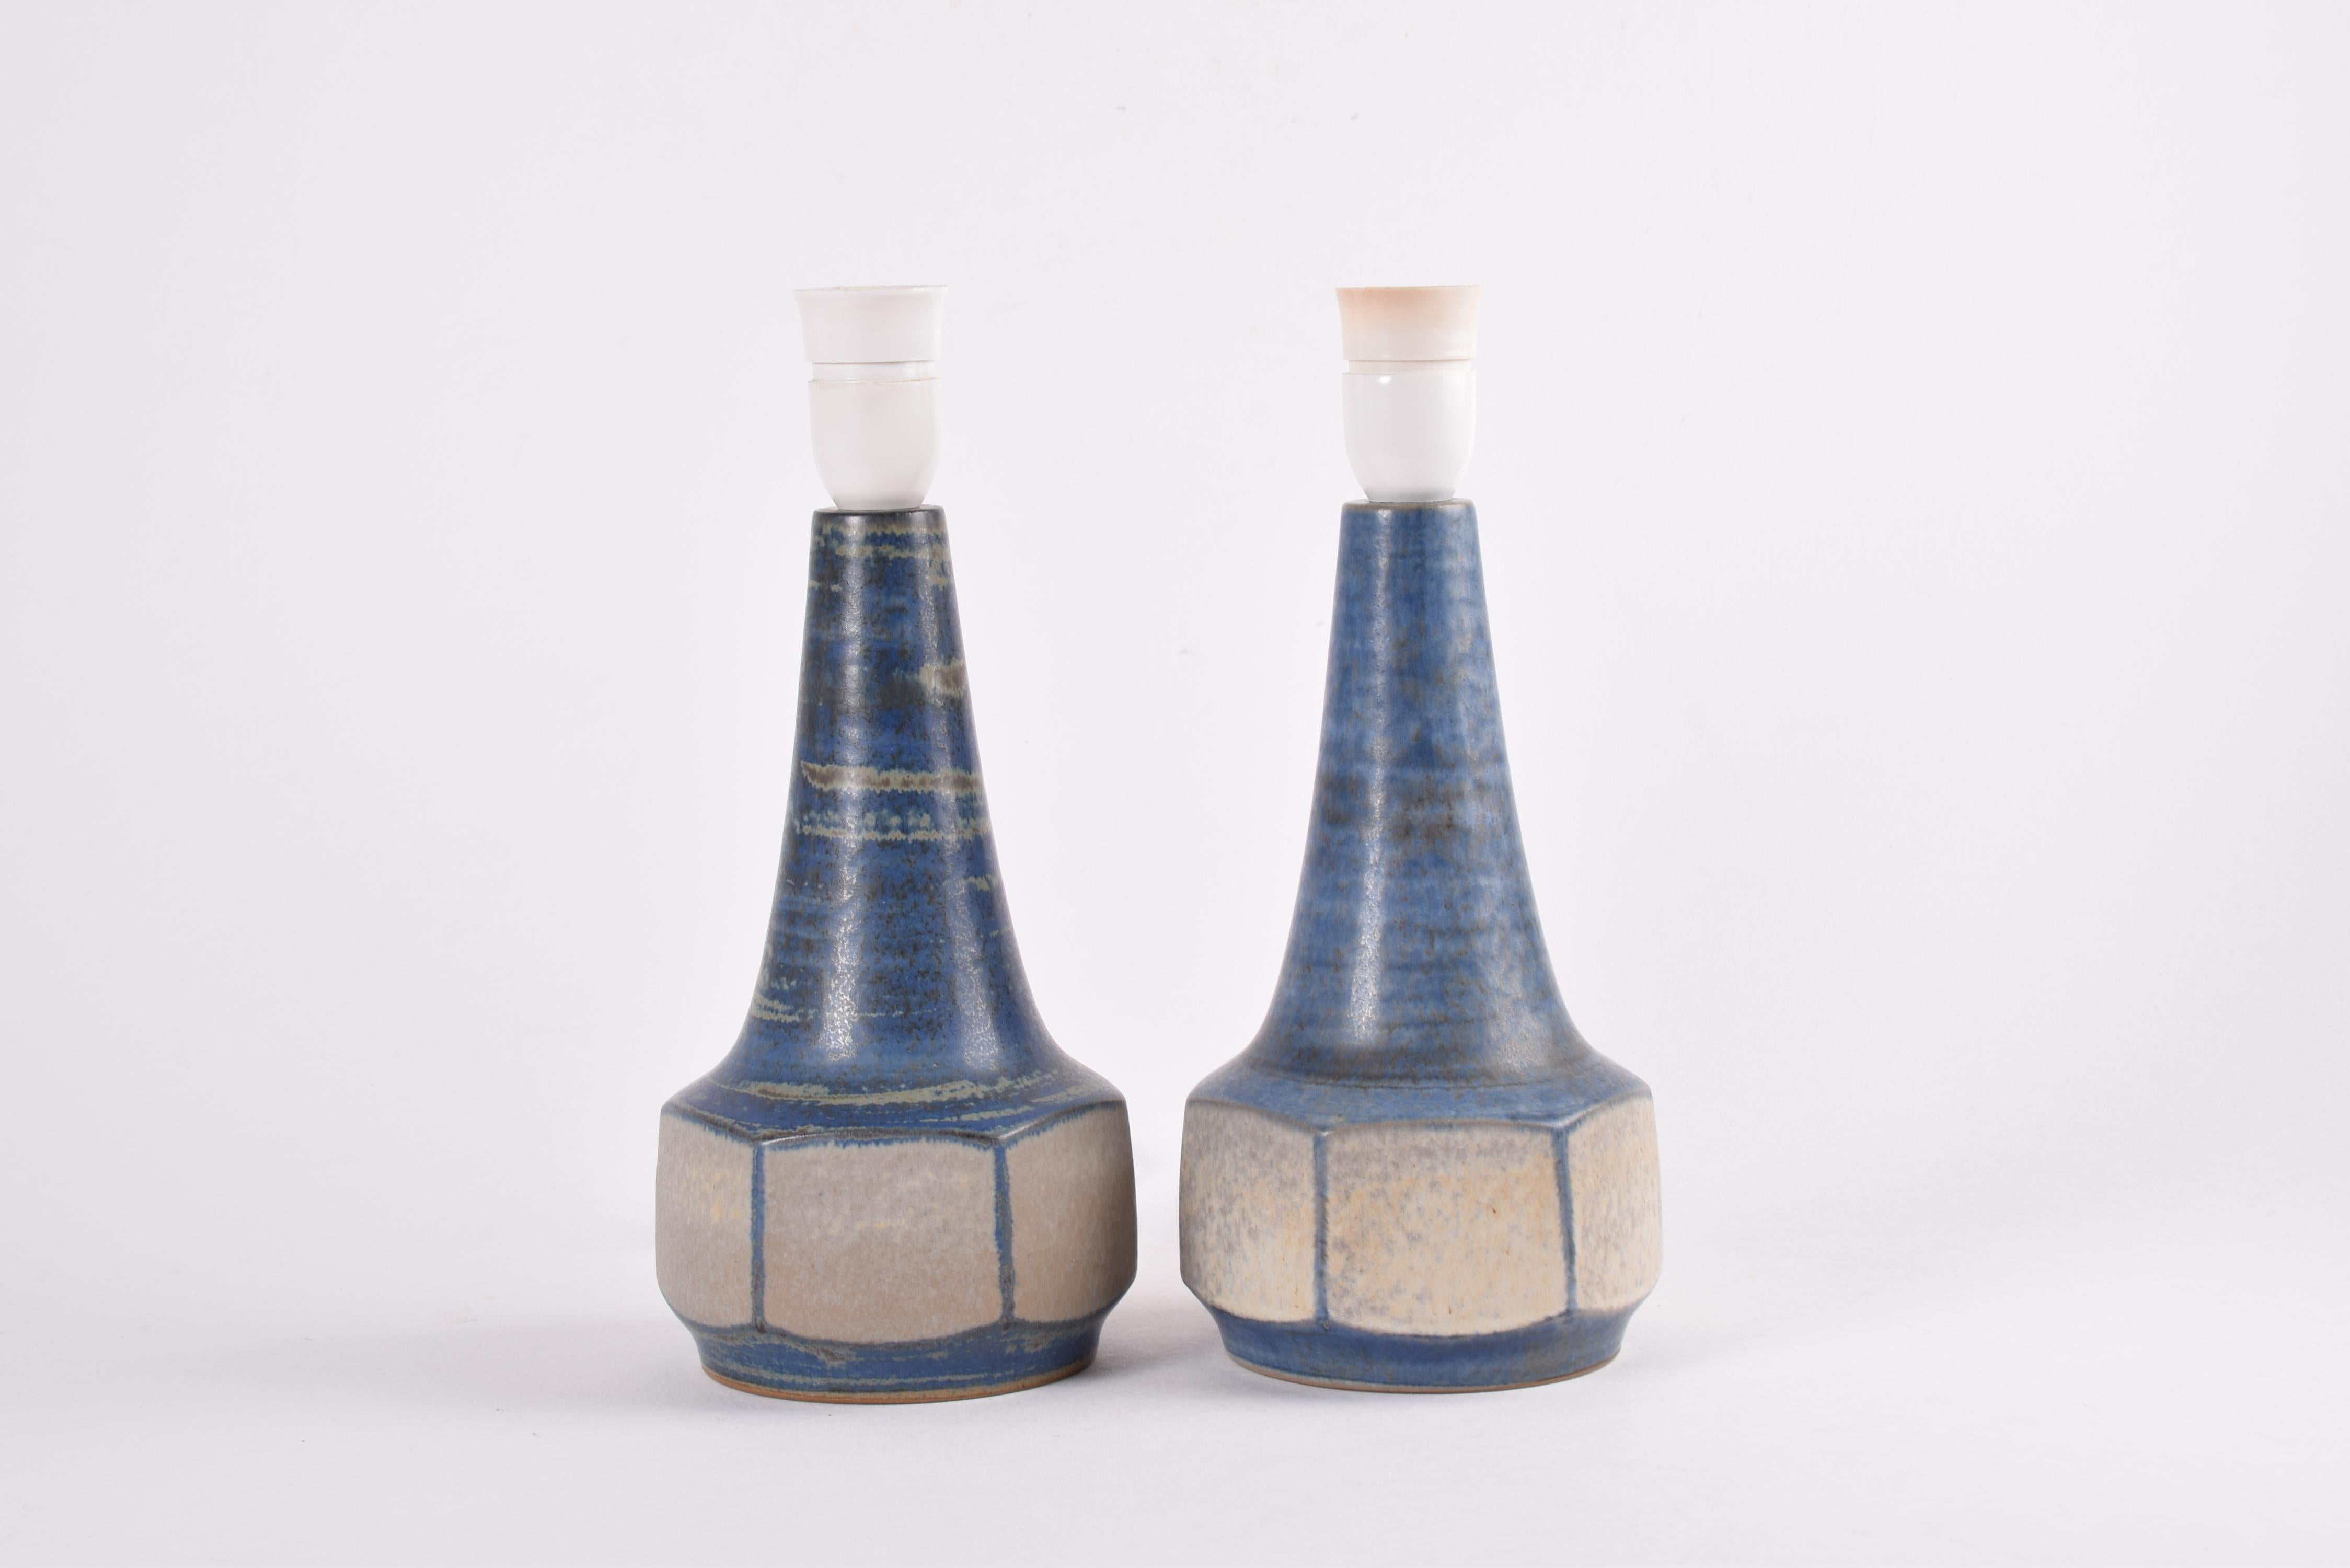 Glazed Pair of Marianne Starck for Michael Andersen Table Lamps Blue Gray, Danish 1960s For Sale